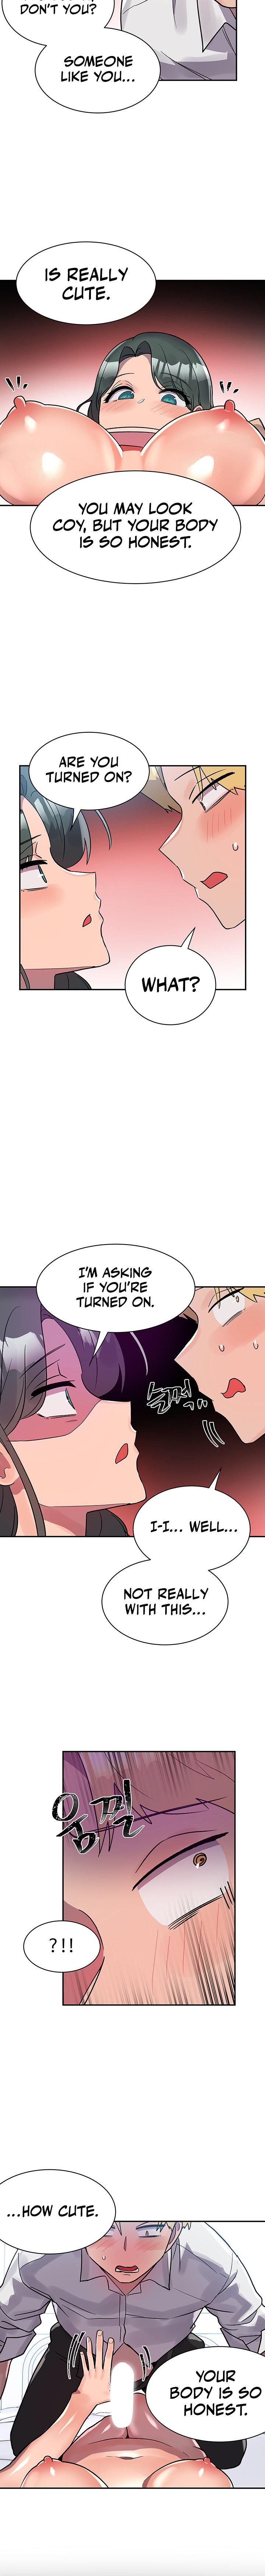 Relationship Reverse Button: Let’s Educate That Arrogant Girl - Chapter 8 Page 16